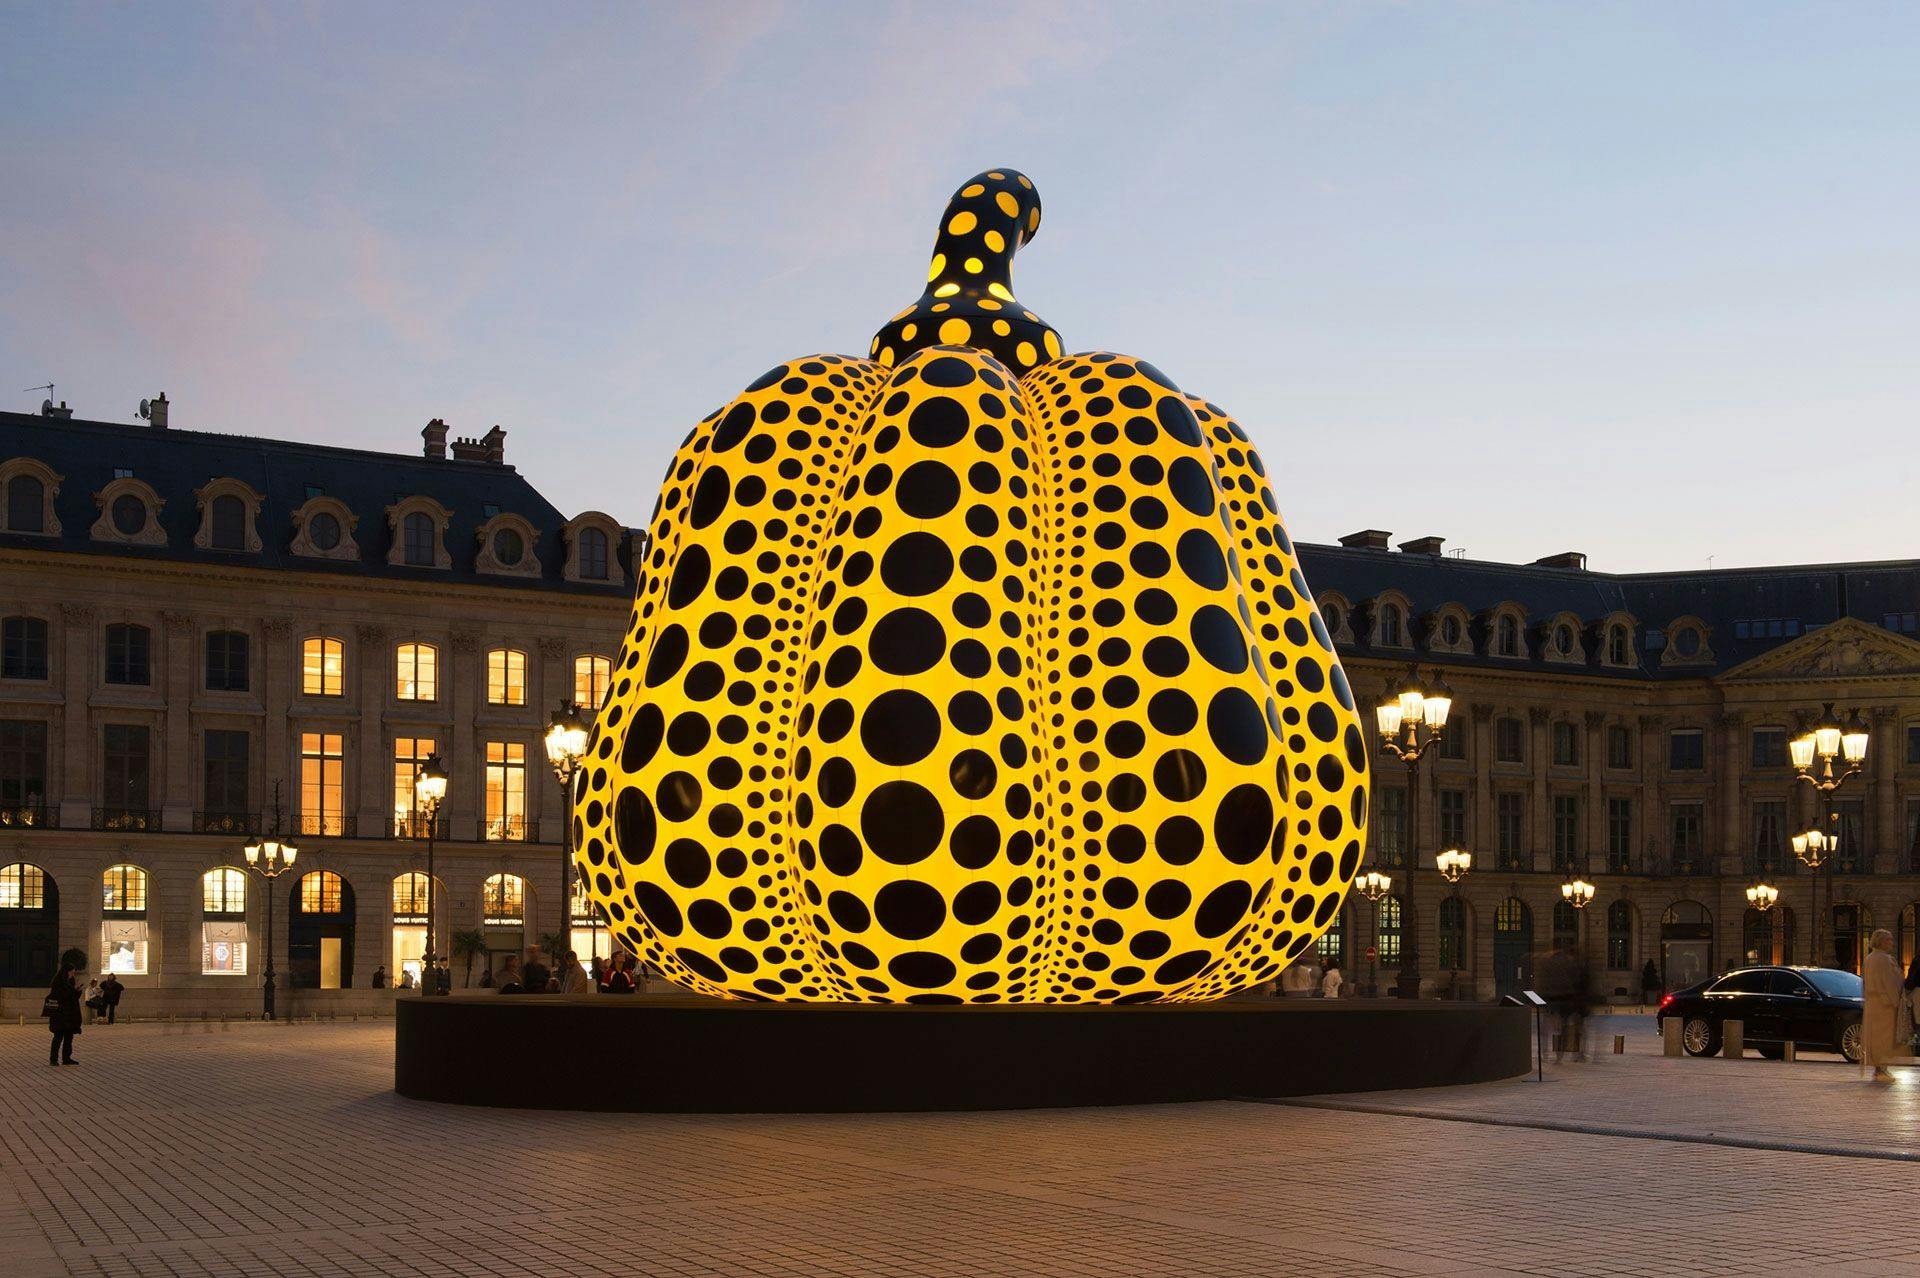 A photo of a sculpture by Yayoi Kusama in Paris, titled Life of the Pumpkin Recites, All About the Biggest Love for the People, dated 2019.